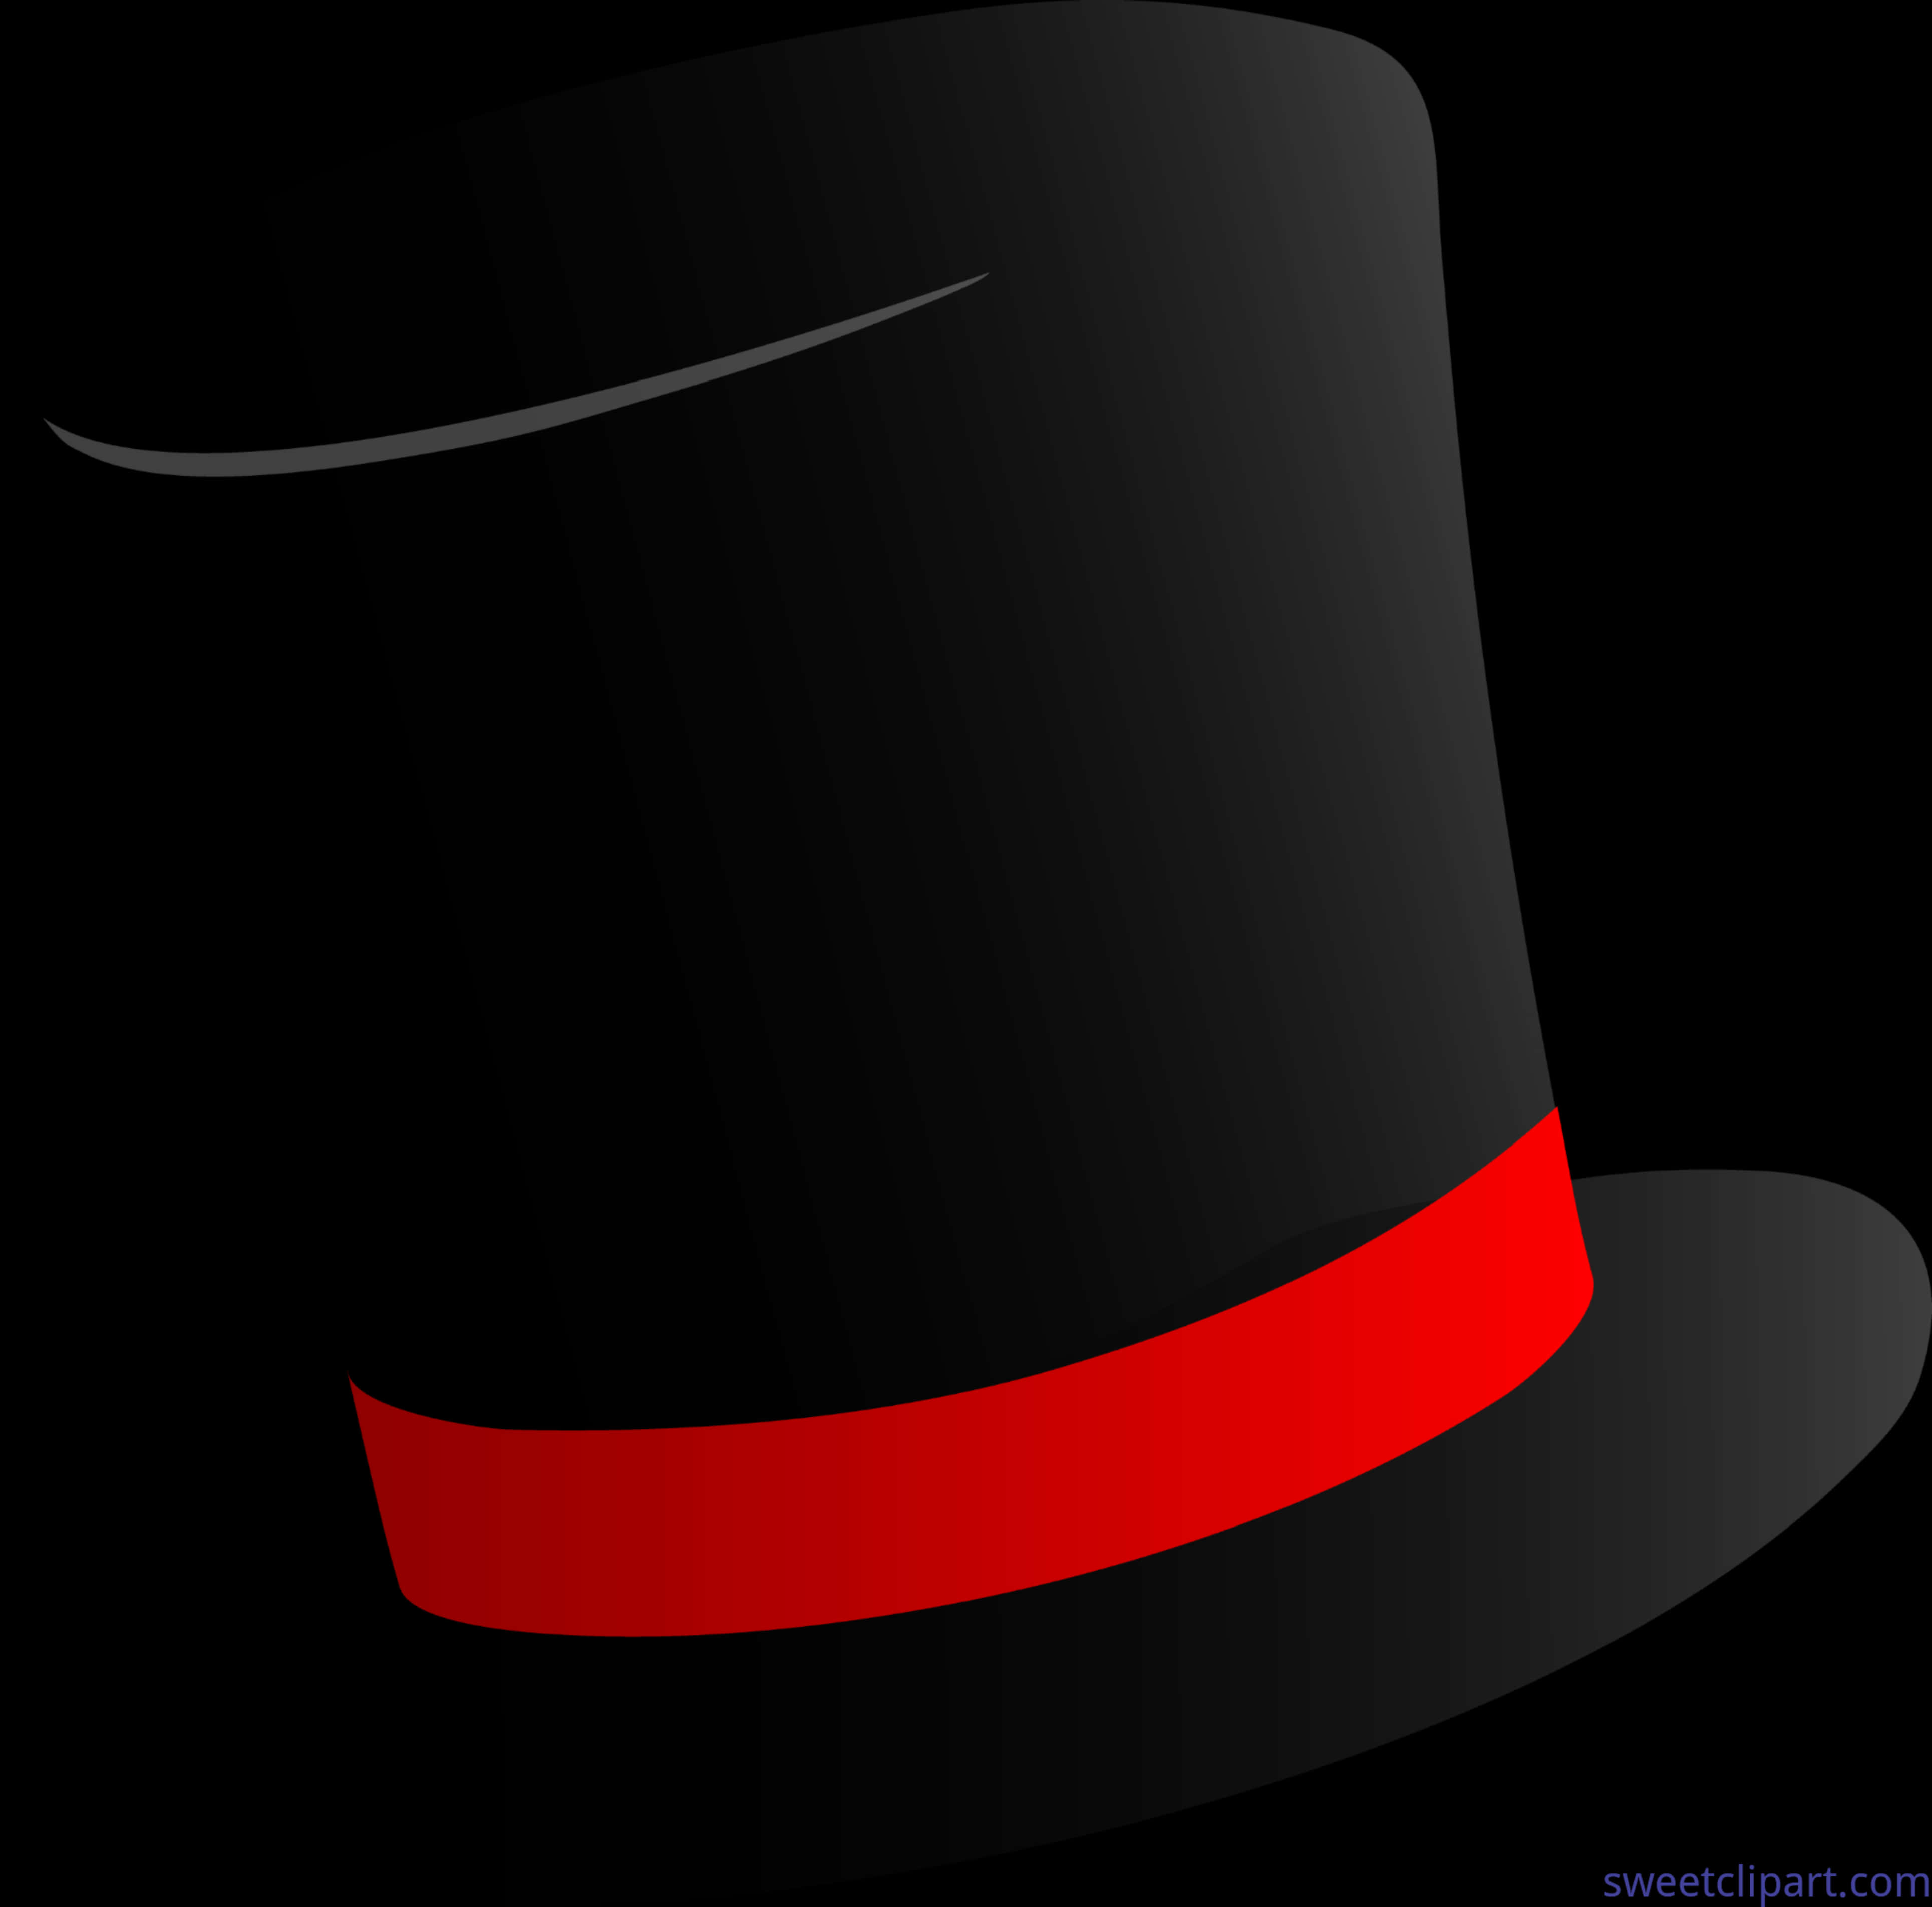 A Black Top Hat With A Red Ribbon